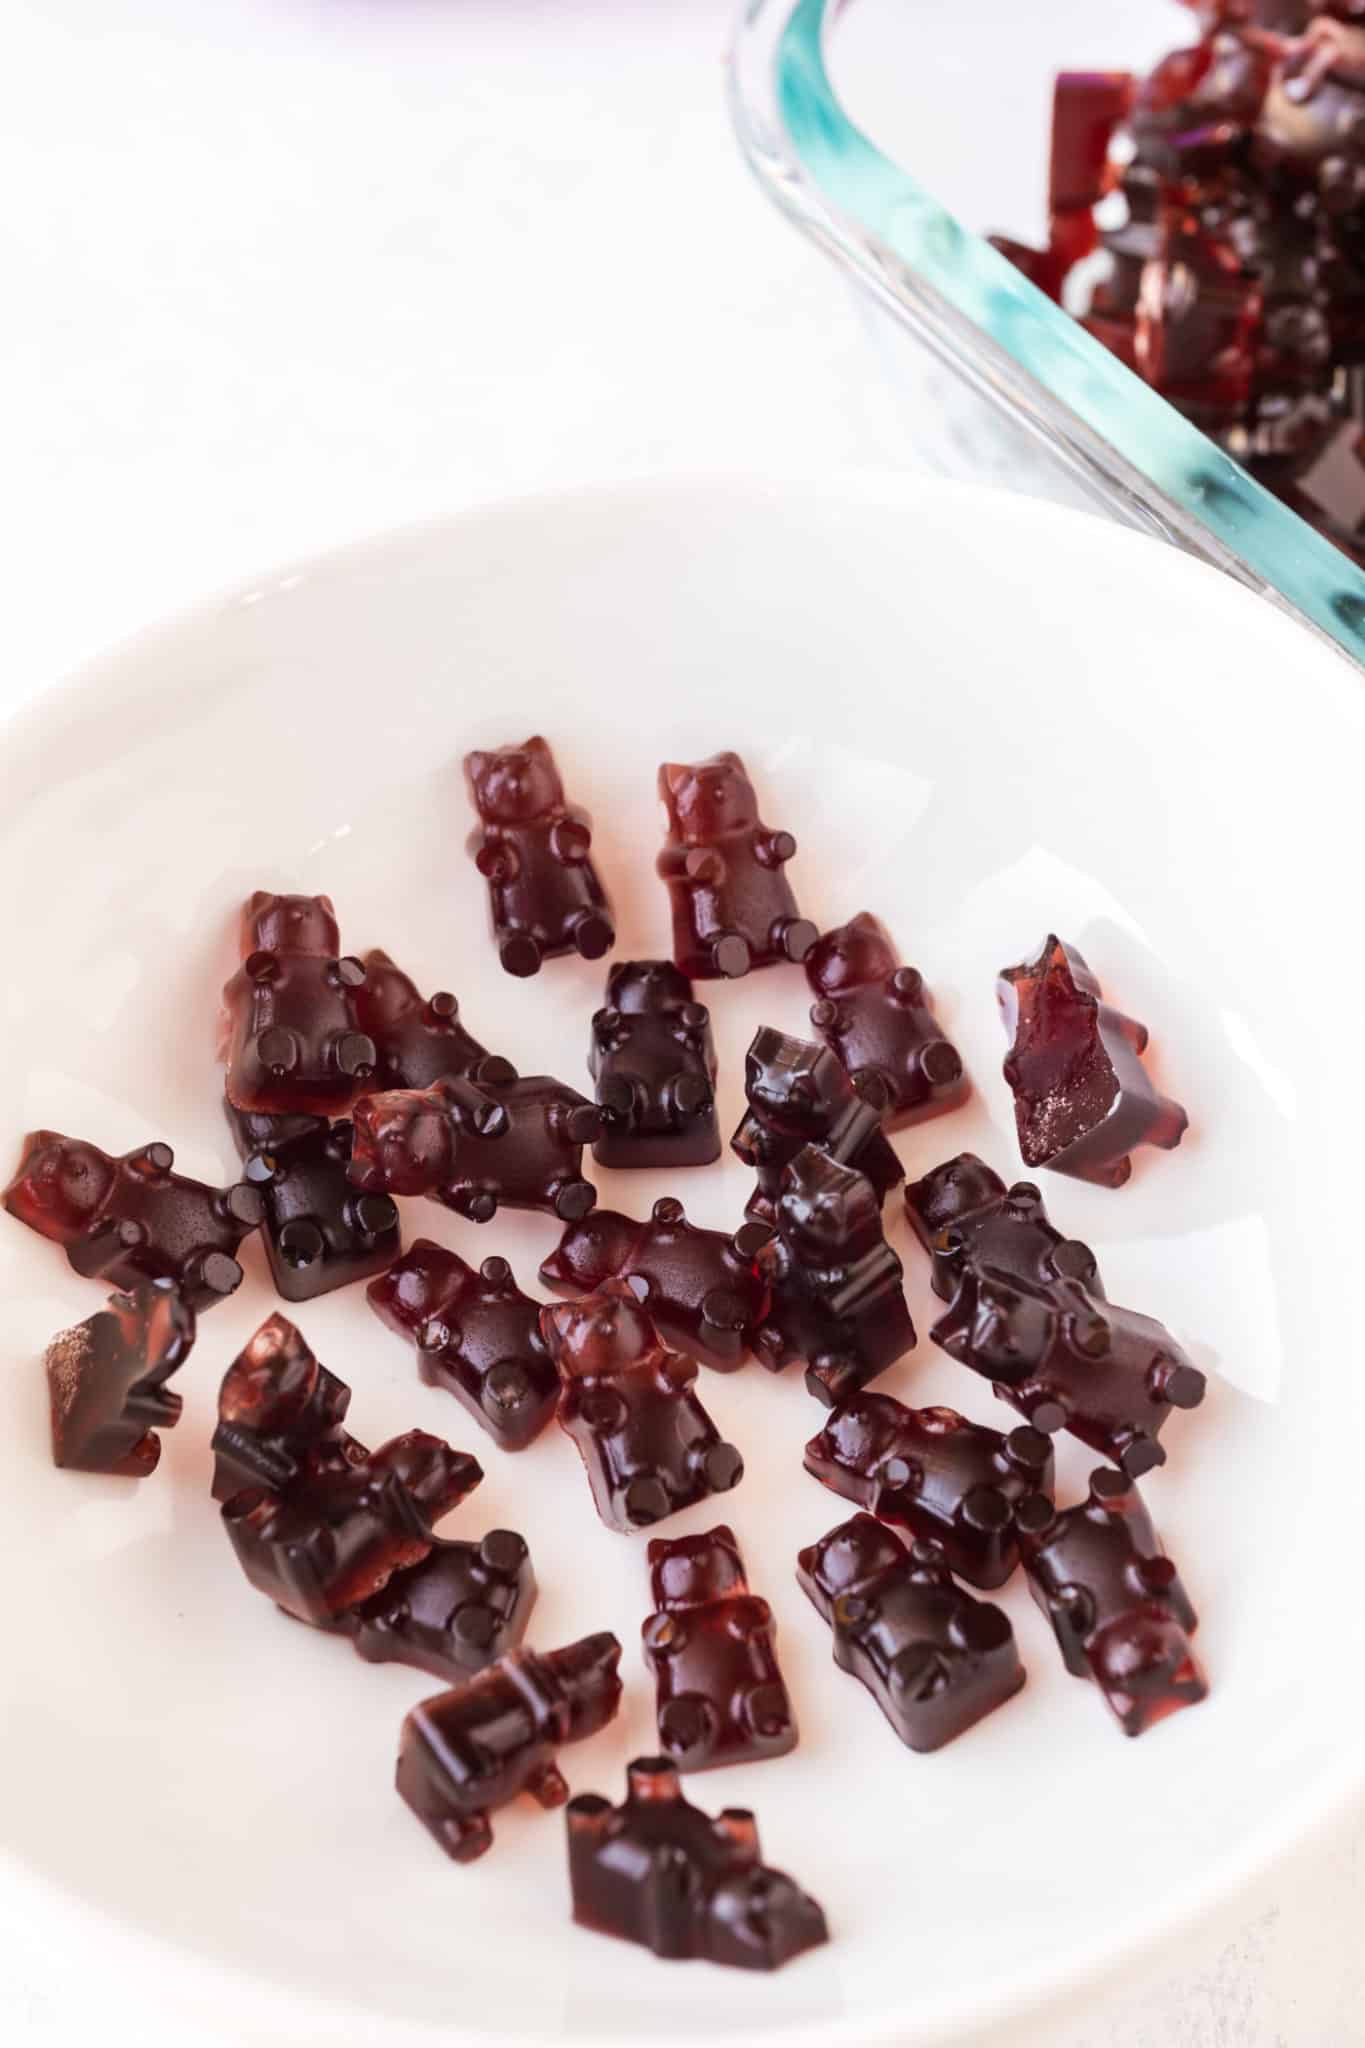 pomegranate gummy bears served on a white plate.